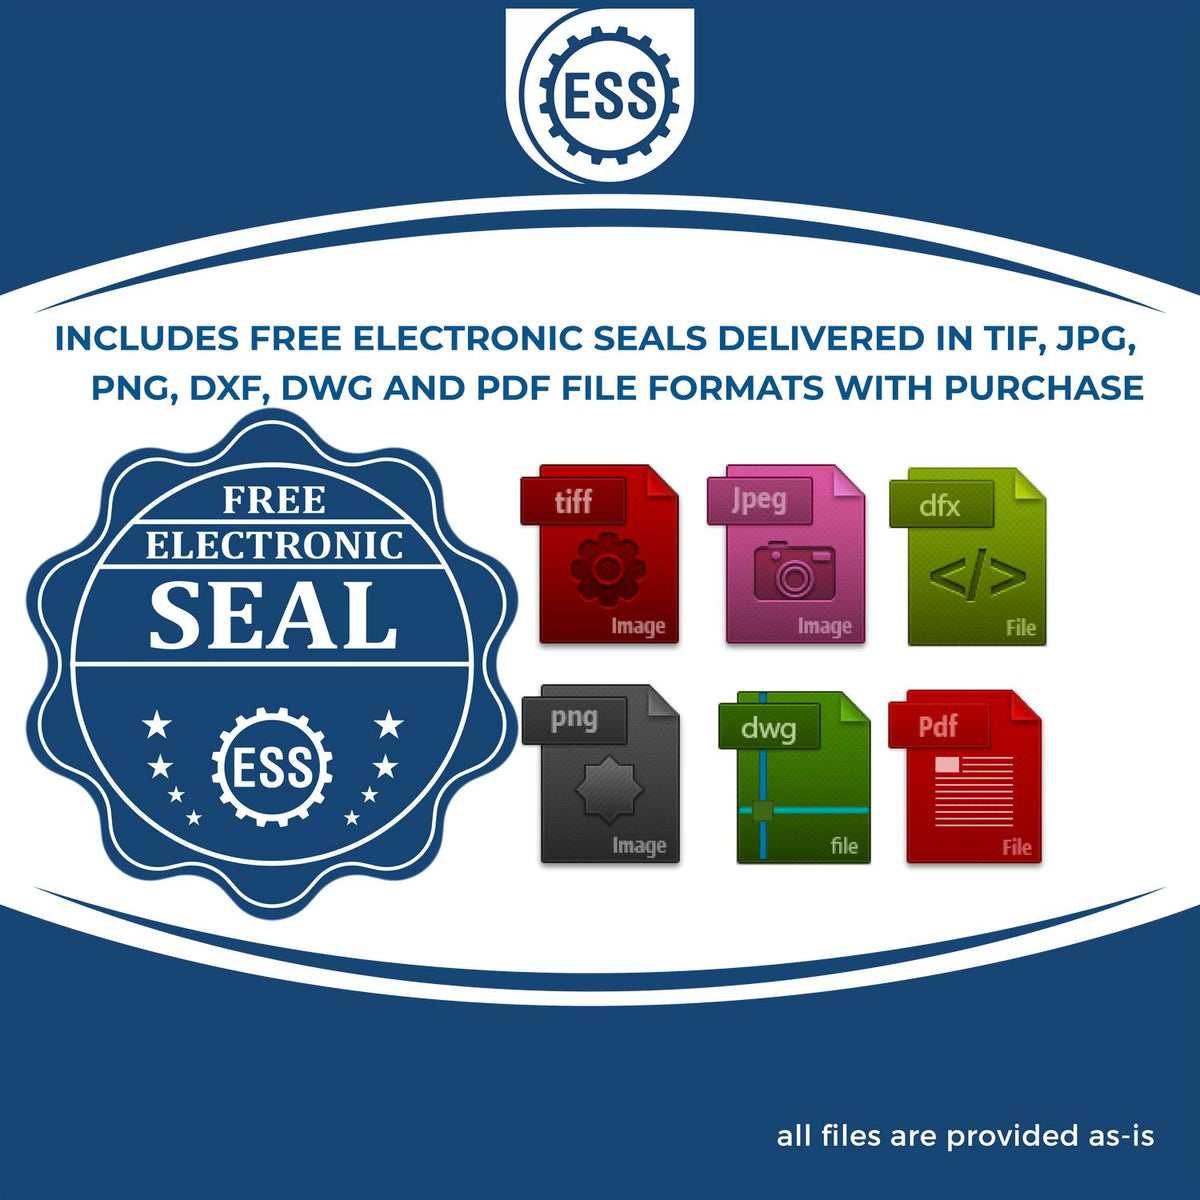 An infographic for the free electronic seal for the Hybrid Iowa Land Surveyor Seal illustrating the different file type icons such as DXF, DWG, TIF, JPG and PNG.